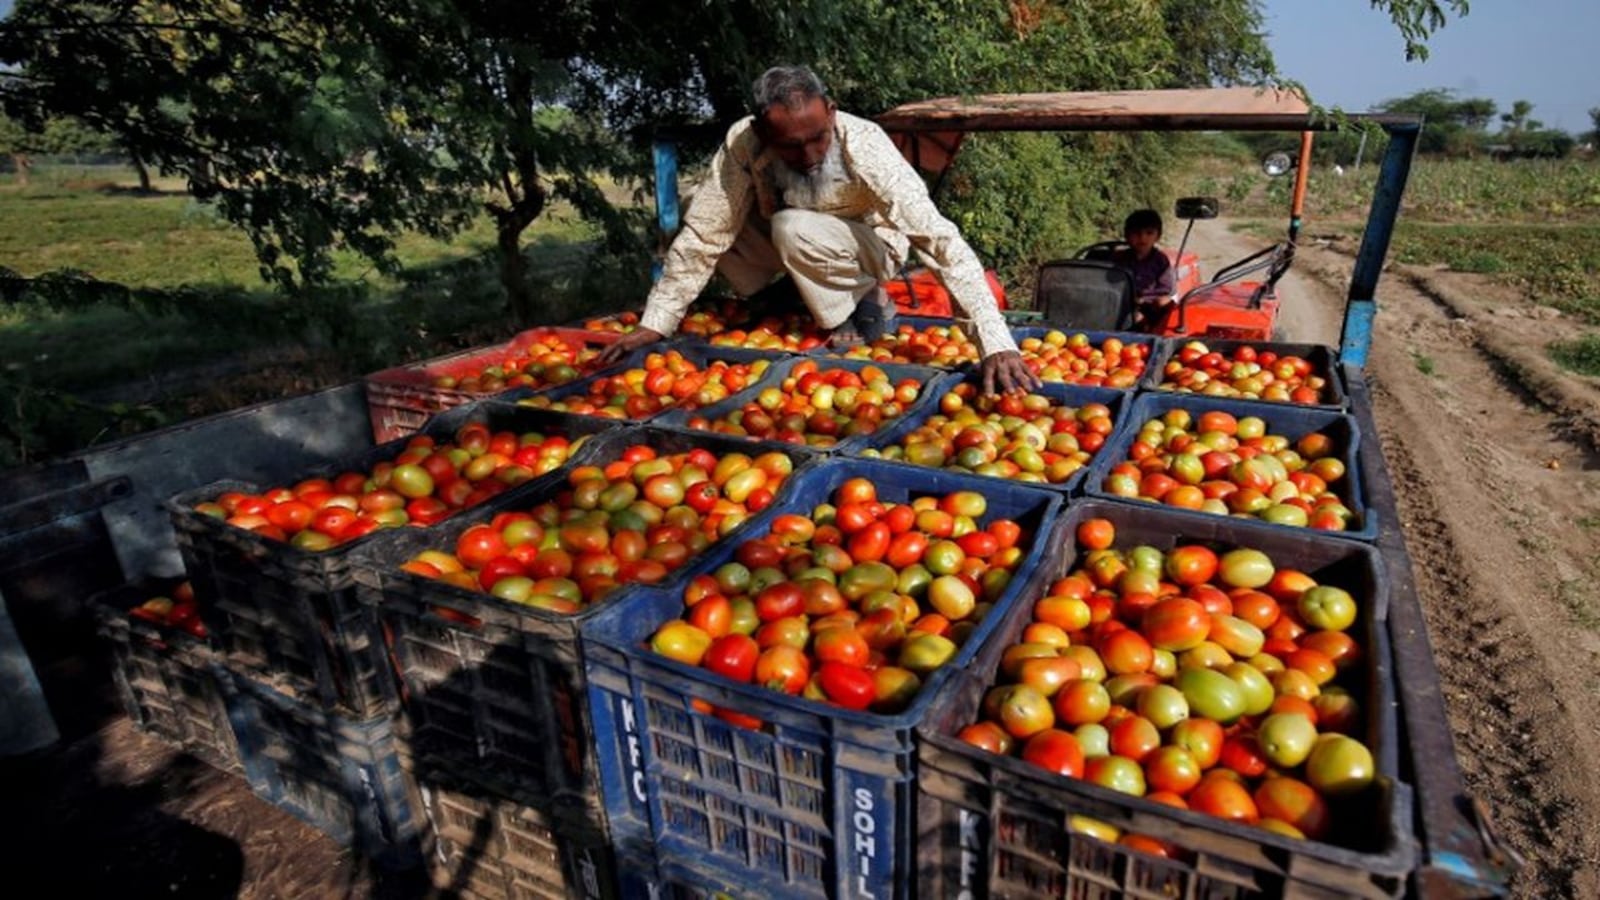 Tomato prices fall 3-year low at Rs 3-10/kg in Delhi, Bengaluru, Hyderabad wholesale markets